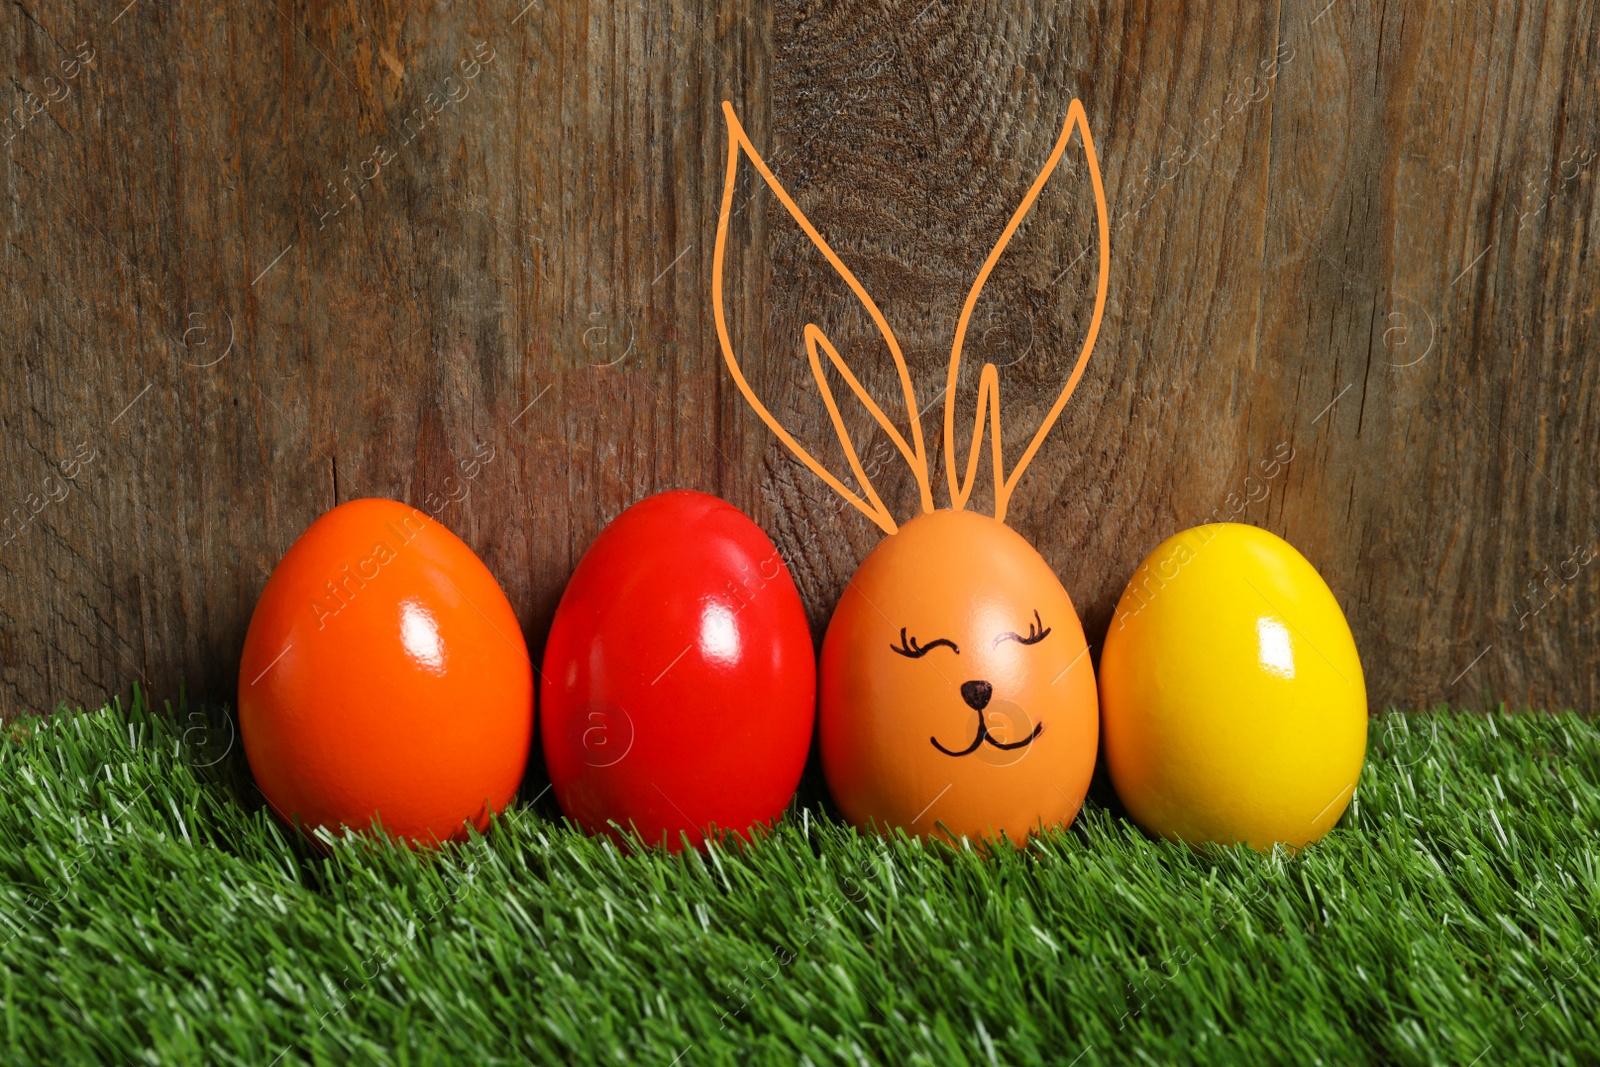 Image of One egg with drawn face and ears as Easter bunny among others on green grass against wooden background